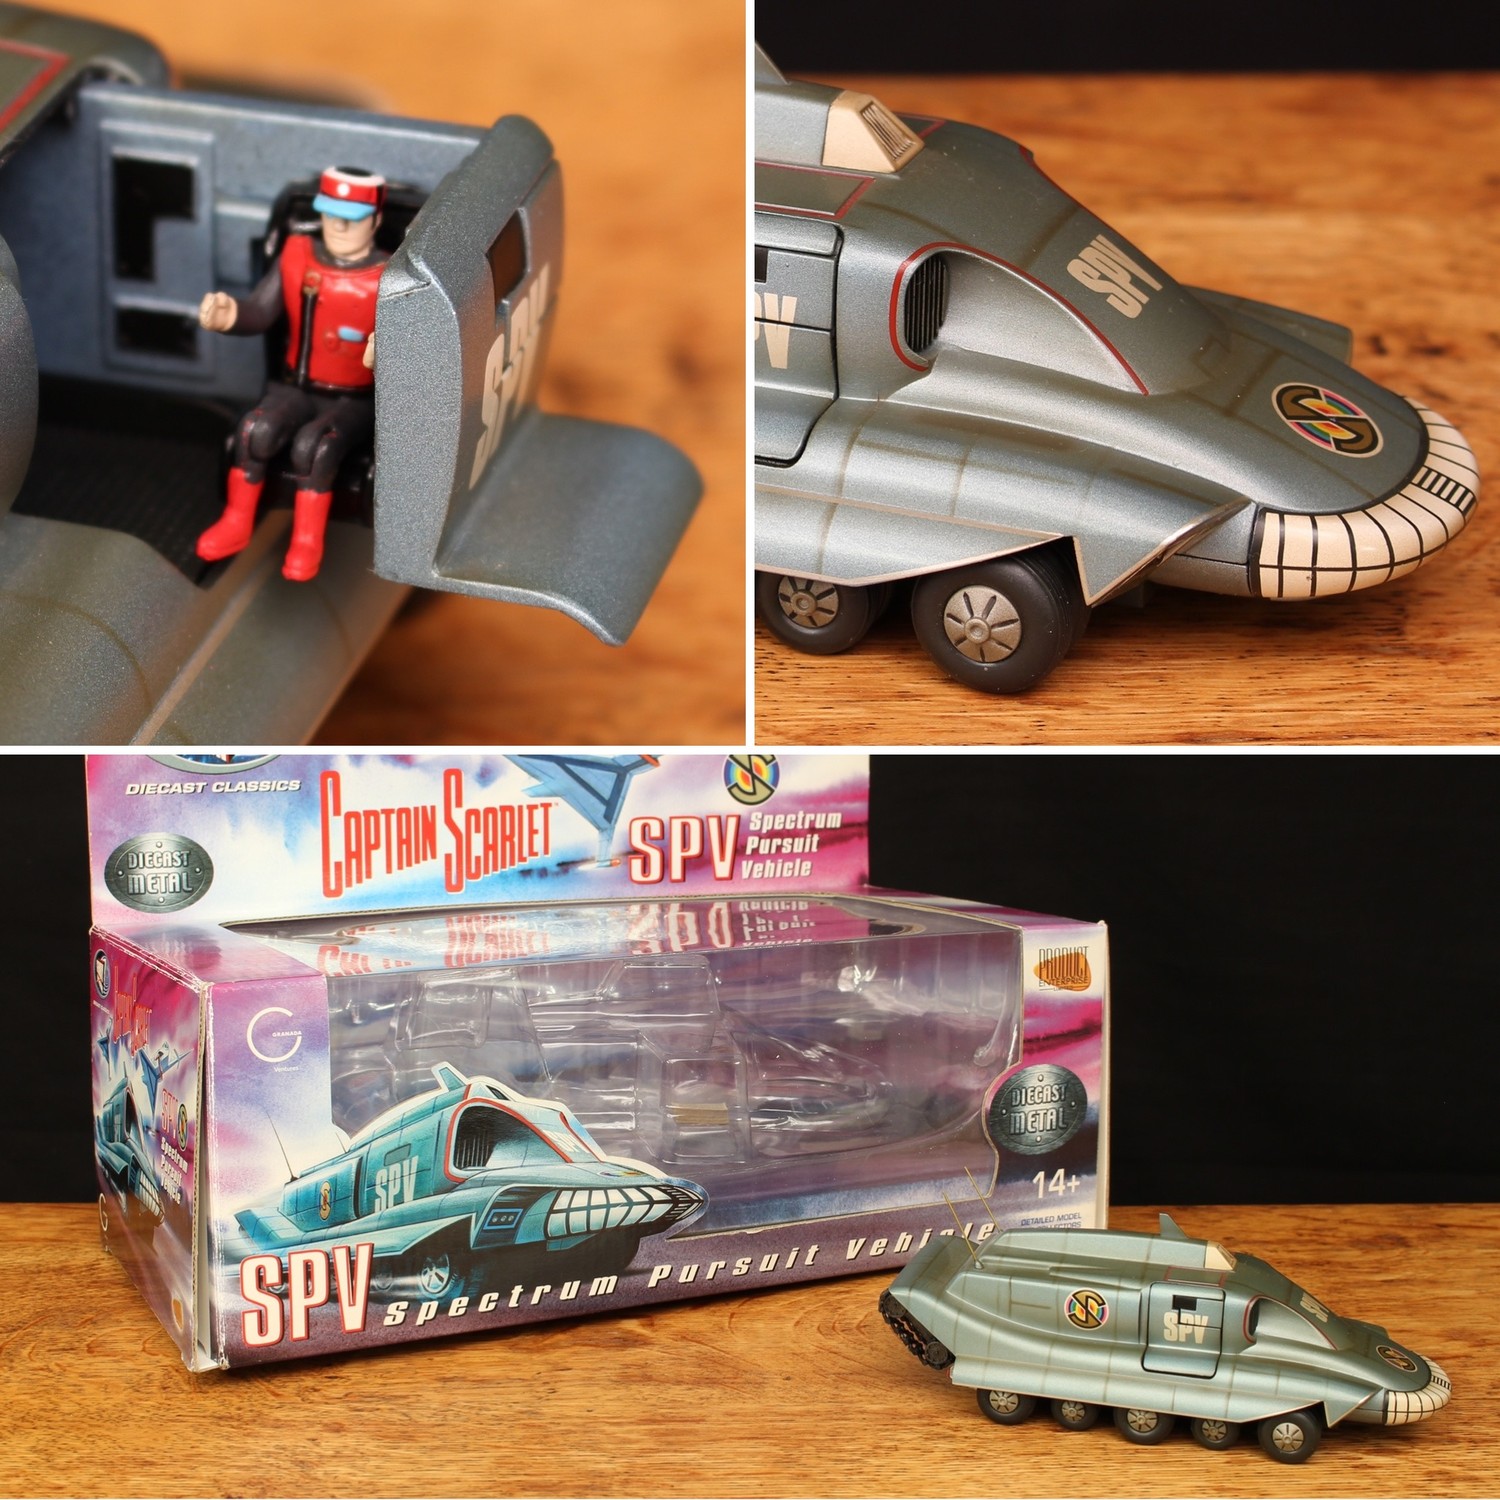 Toys From the Attic - The John Street Collection of TV and Sci-Fi related Toys (Lots 5001 - 5049), a - Image 3 of 6